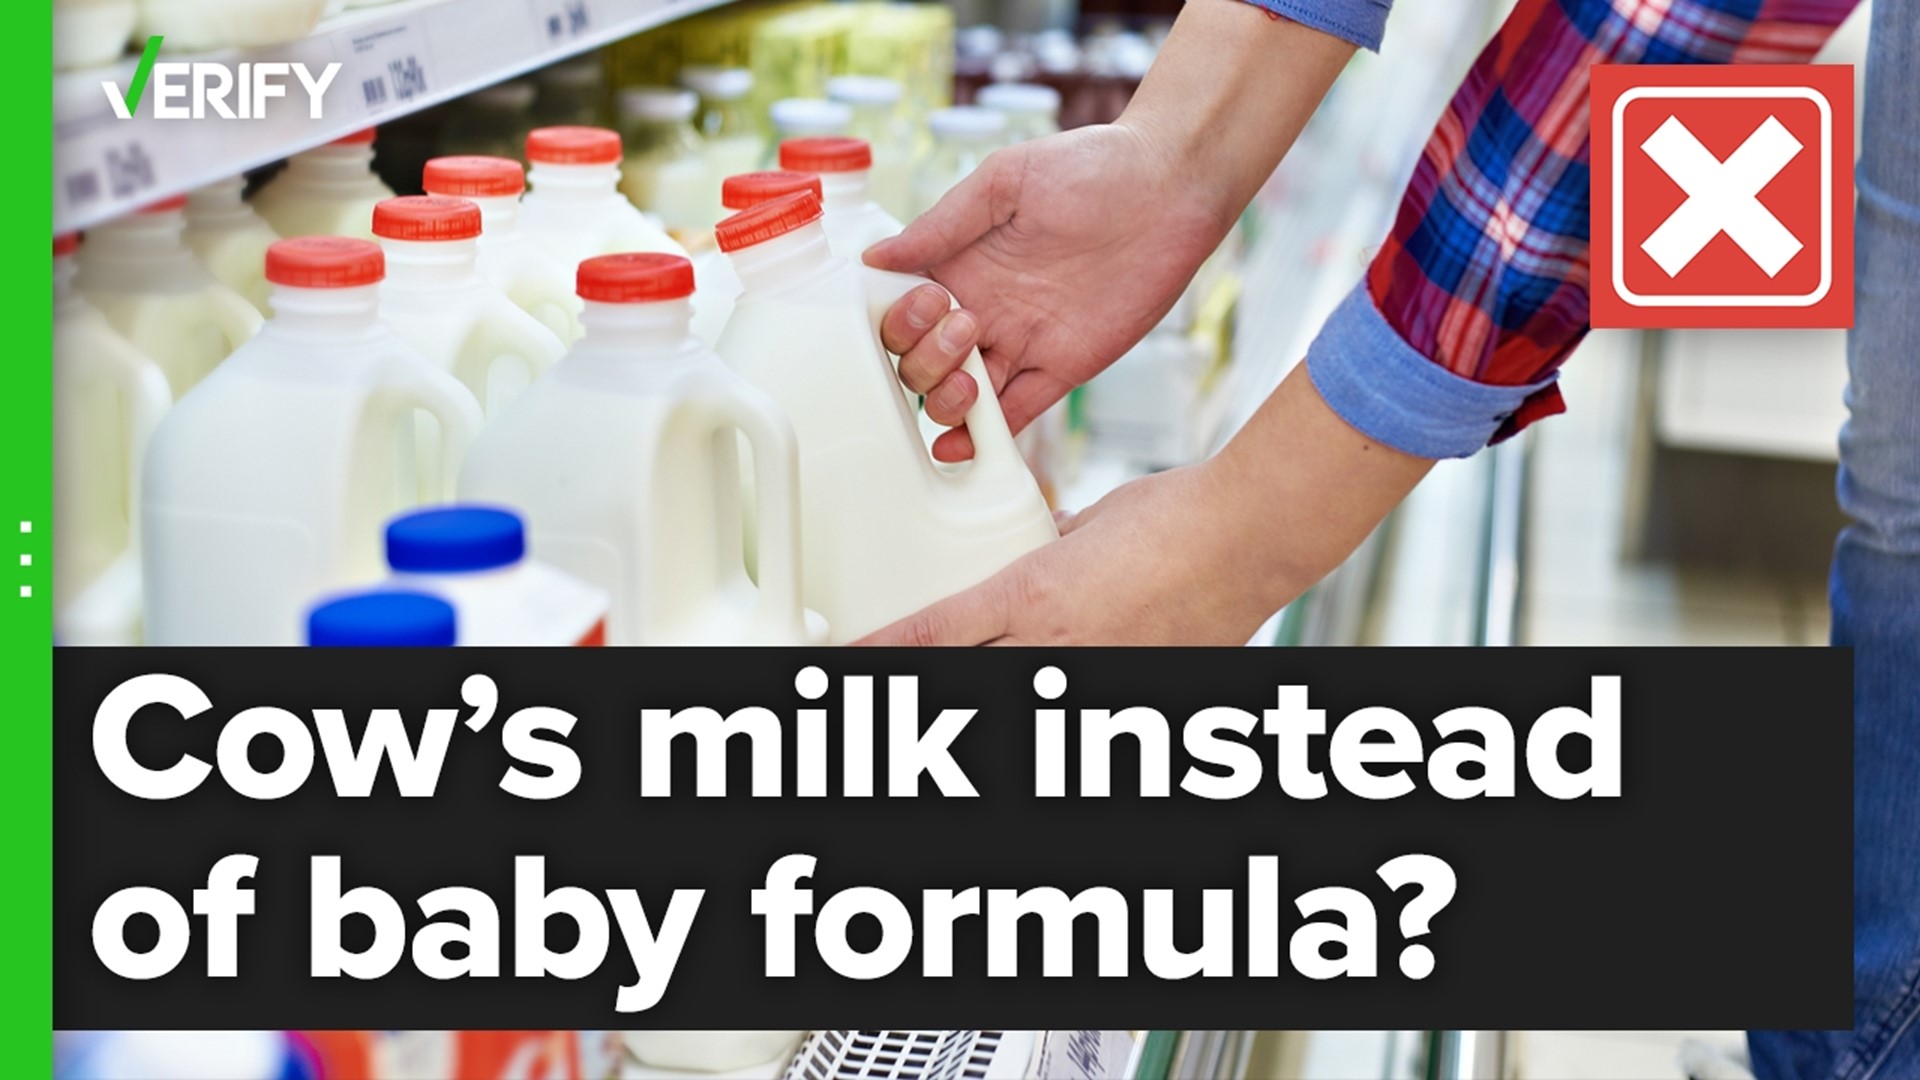 Cow’s milk shouldn’t be given to babies who are 6 to 12 months old, except in an emergency where every other option has been exhausted.